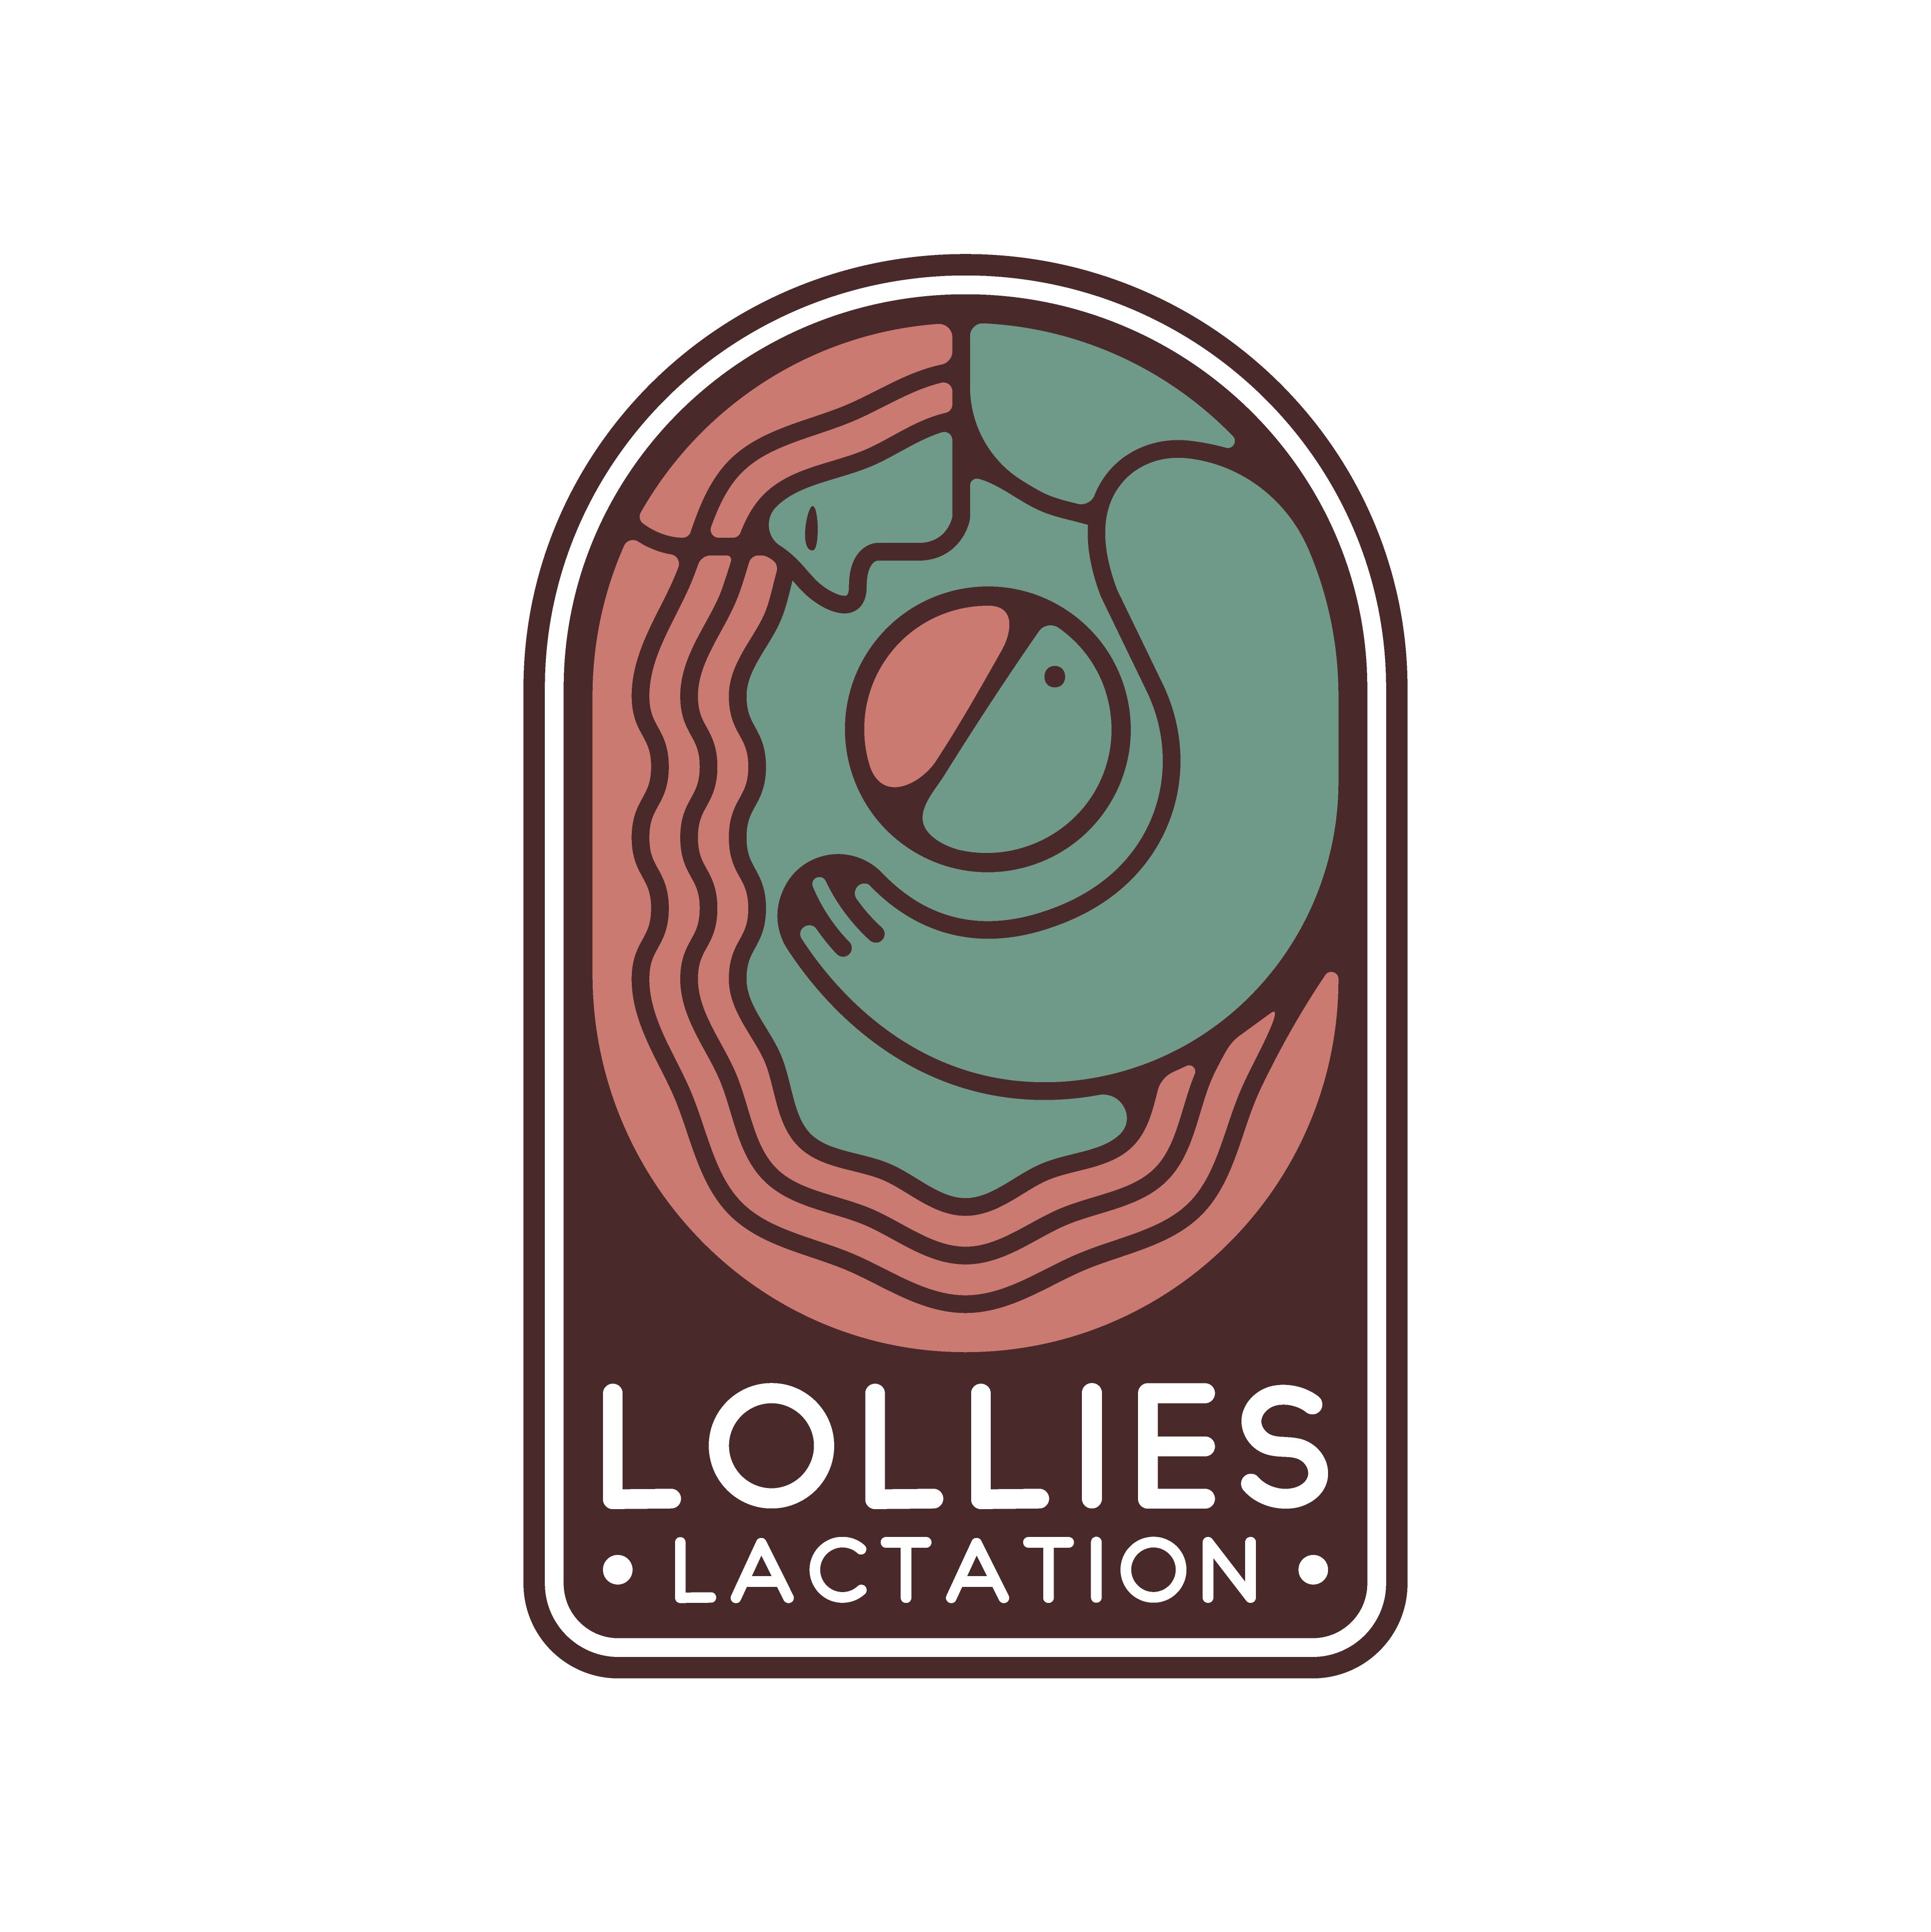 Lollies Lactation logo design by logo designer Logarhythm Creative for your inspiration and for the worlds largest logo competition